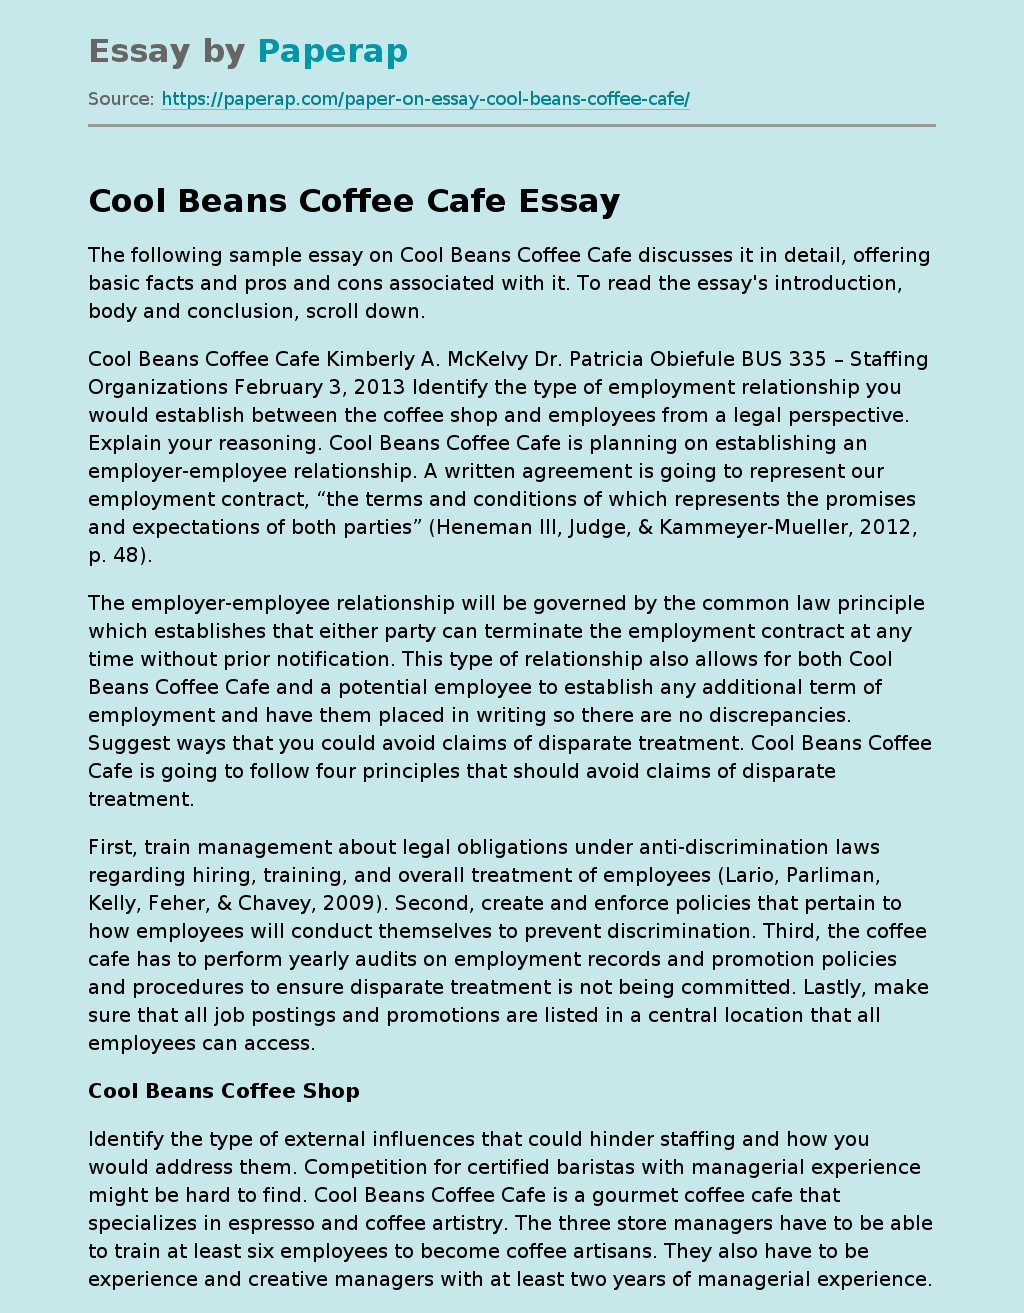 Cool Beans Coffee Cafe